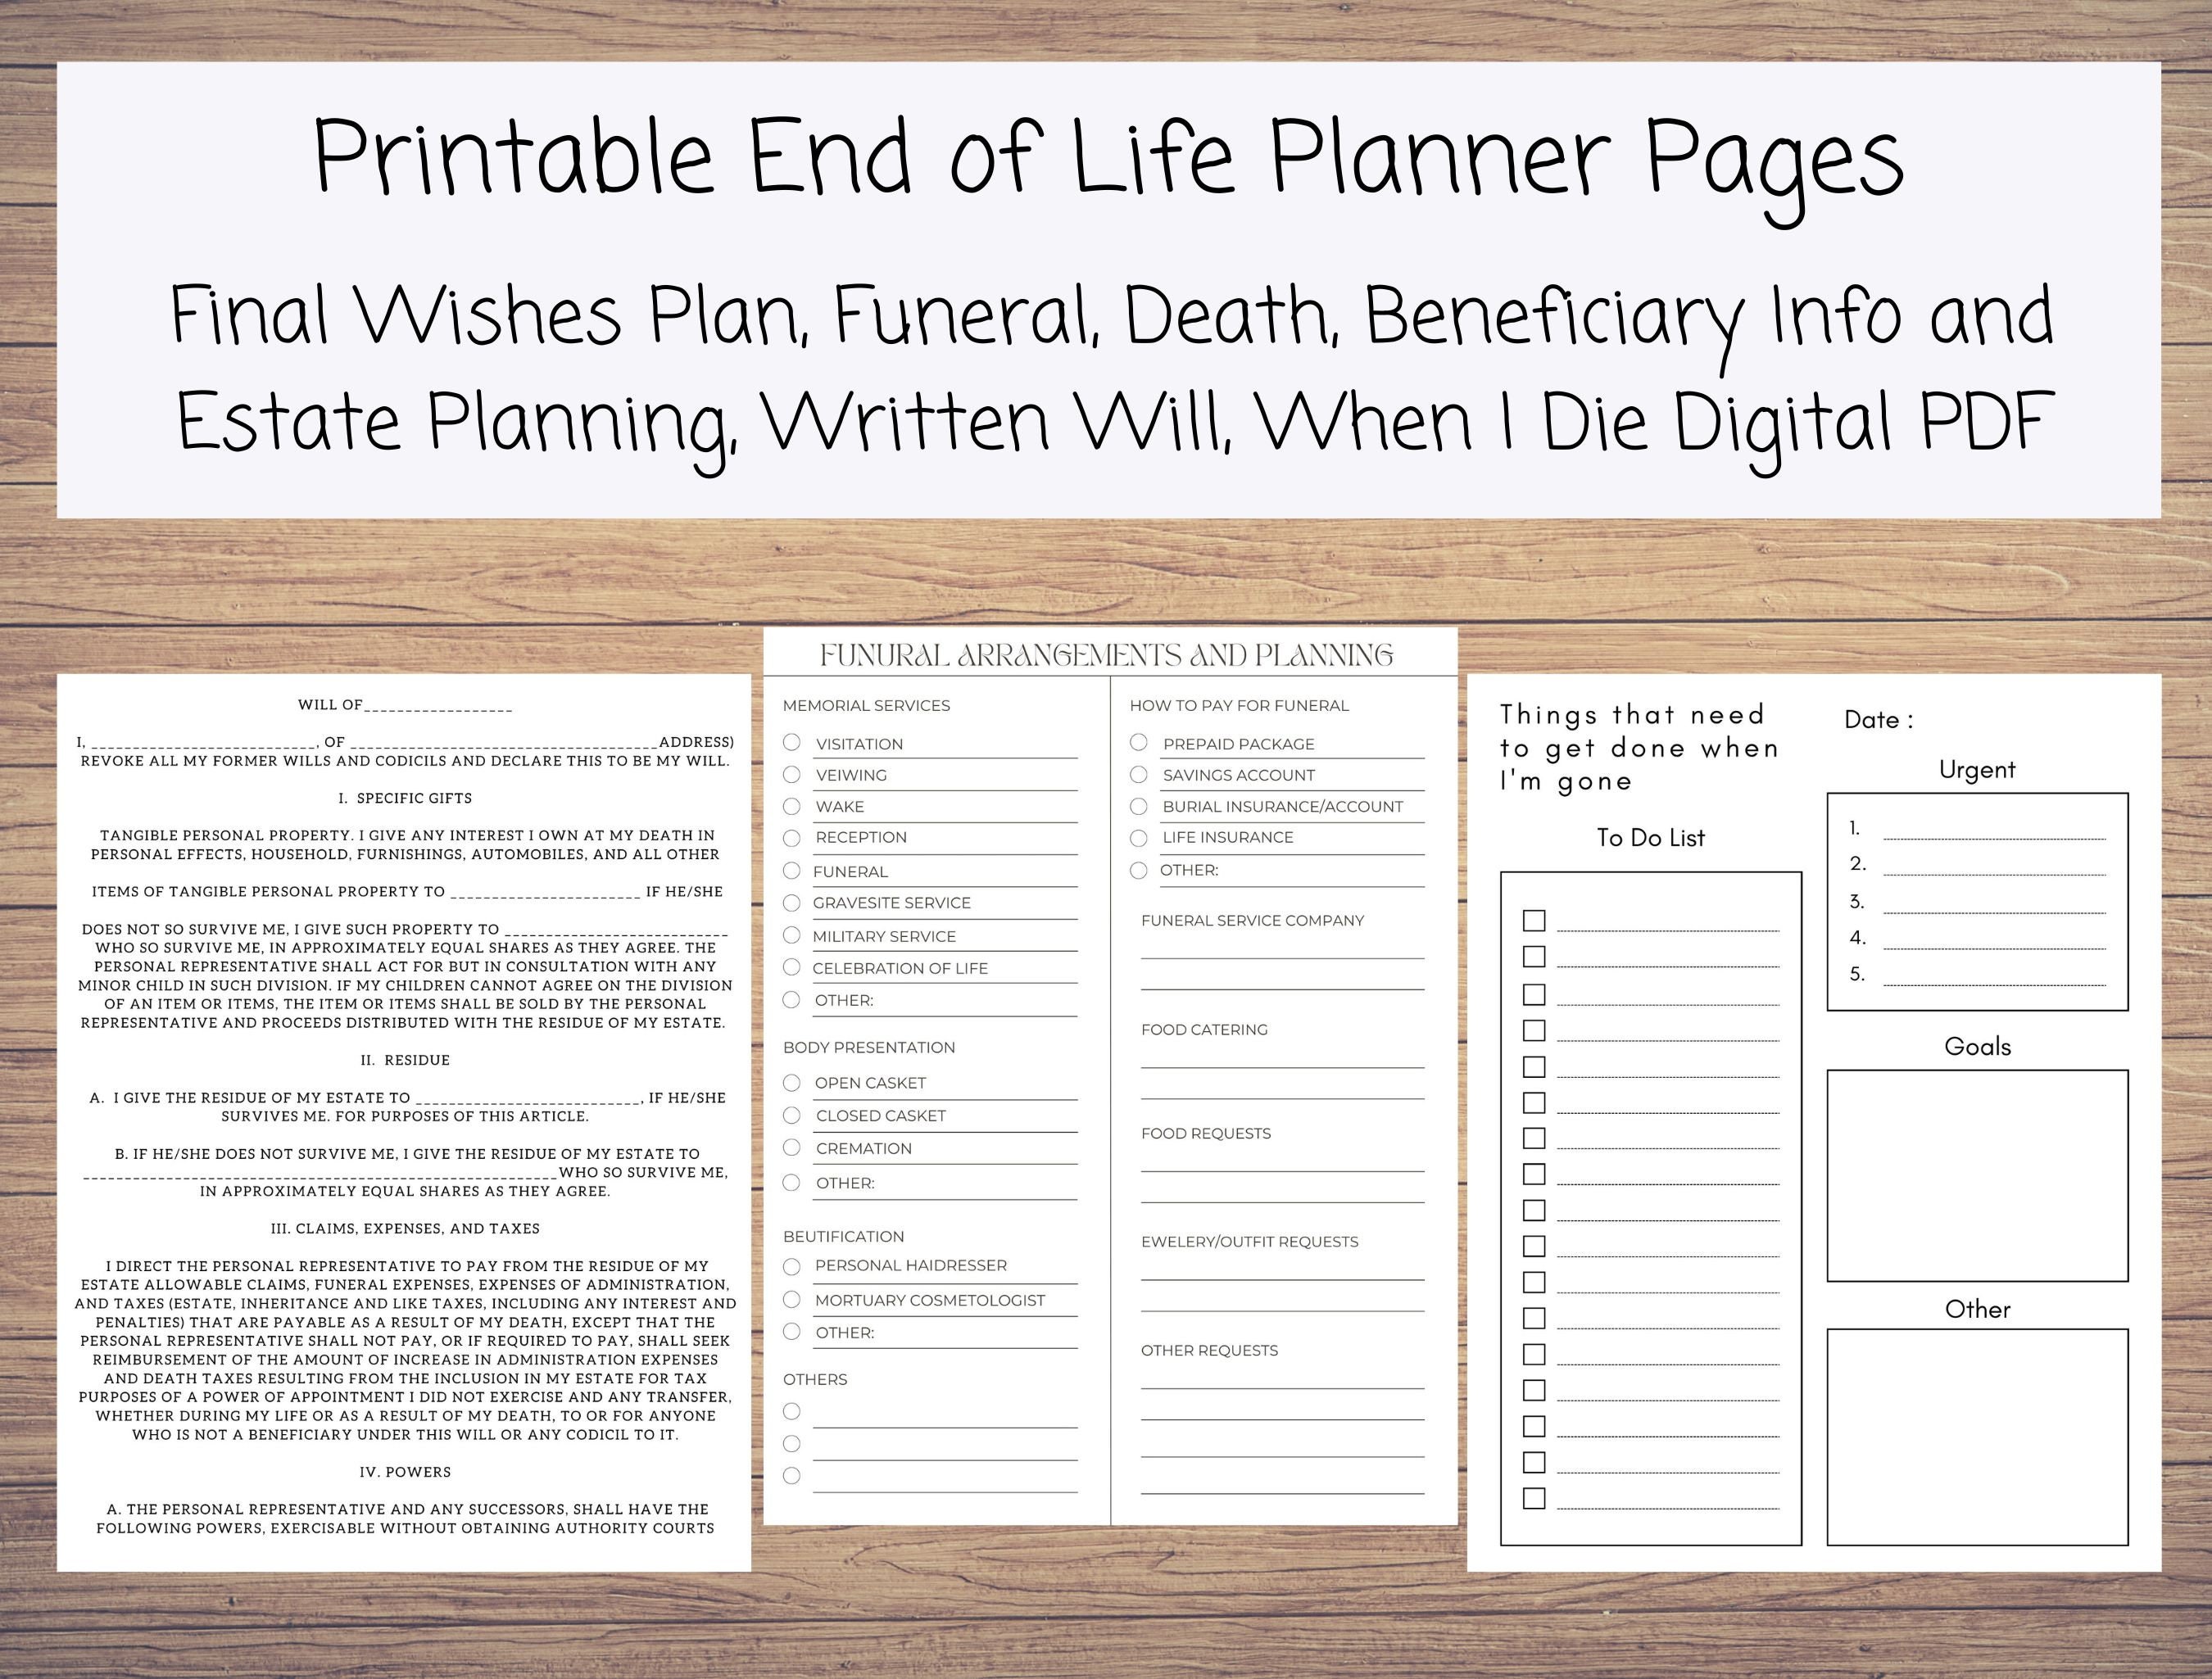 What To Do When I Die : Essential Information for My Family: Guided  Pre-Death Planner and Organizer life planning workbook; Organizer to Record  All  Death Planning, My Last Words and Wishes